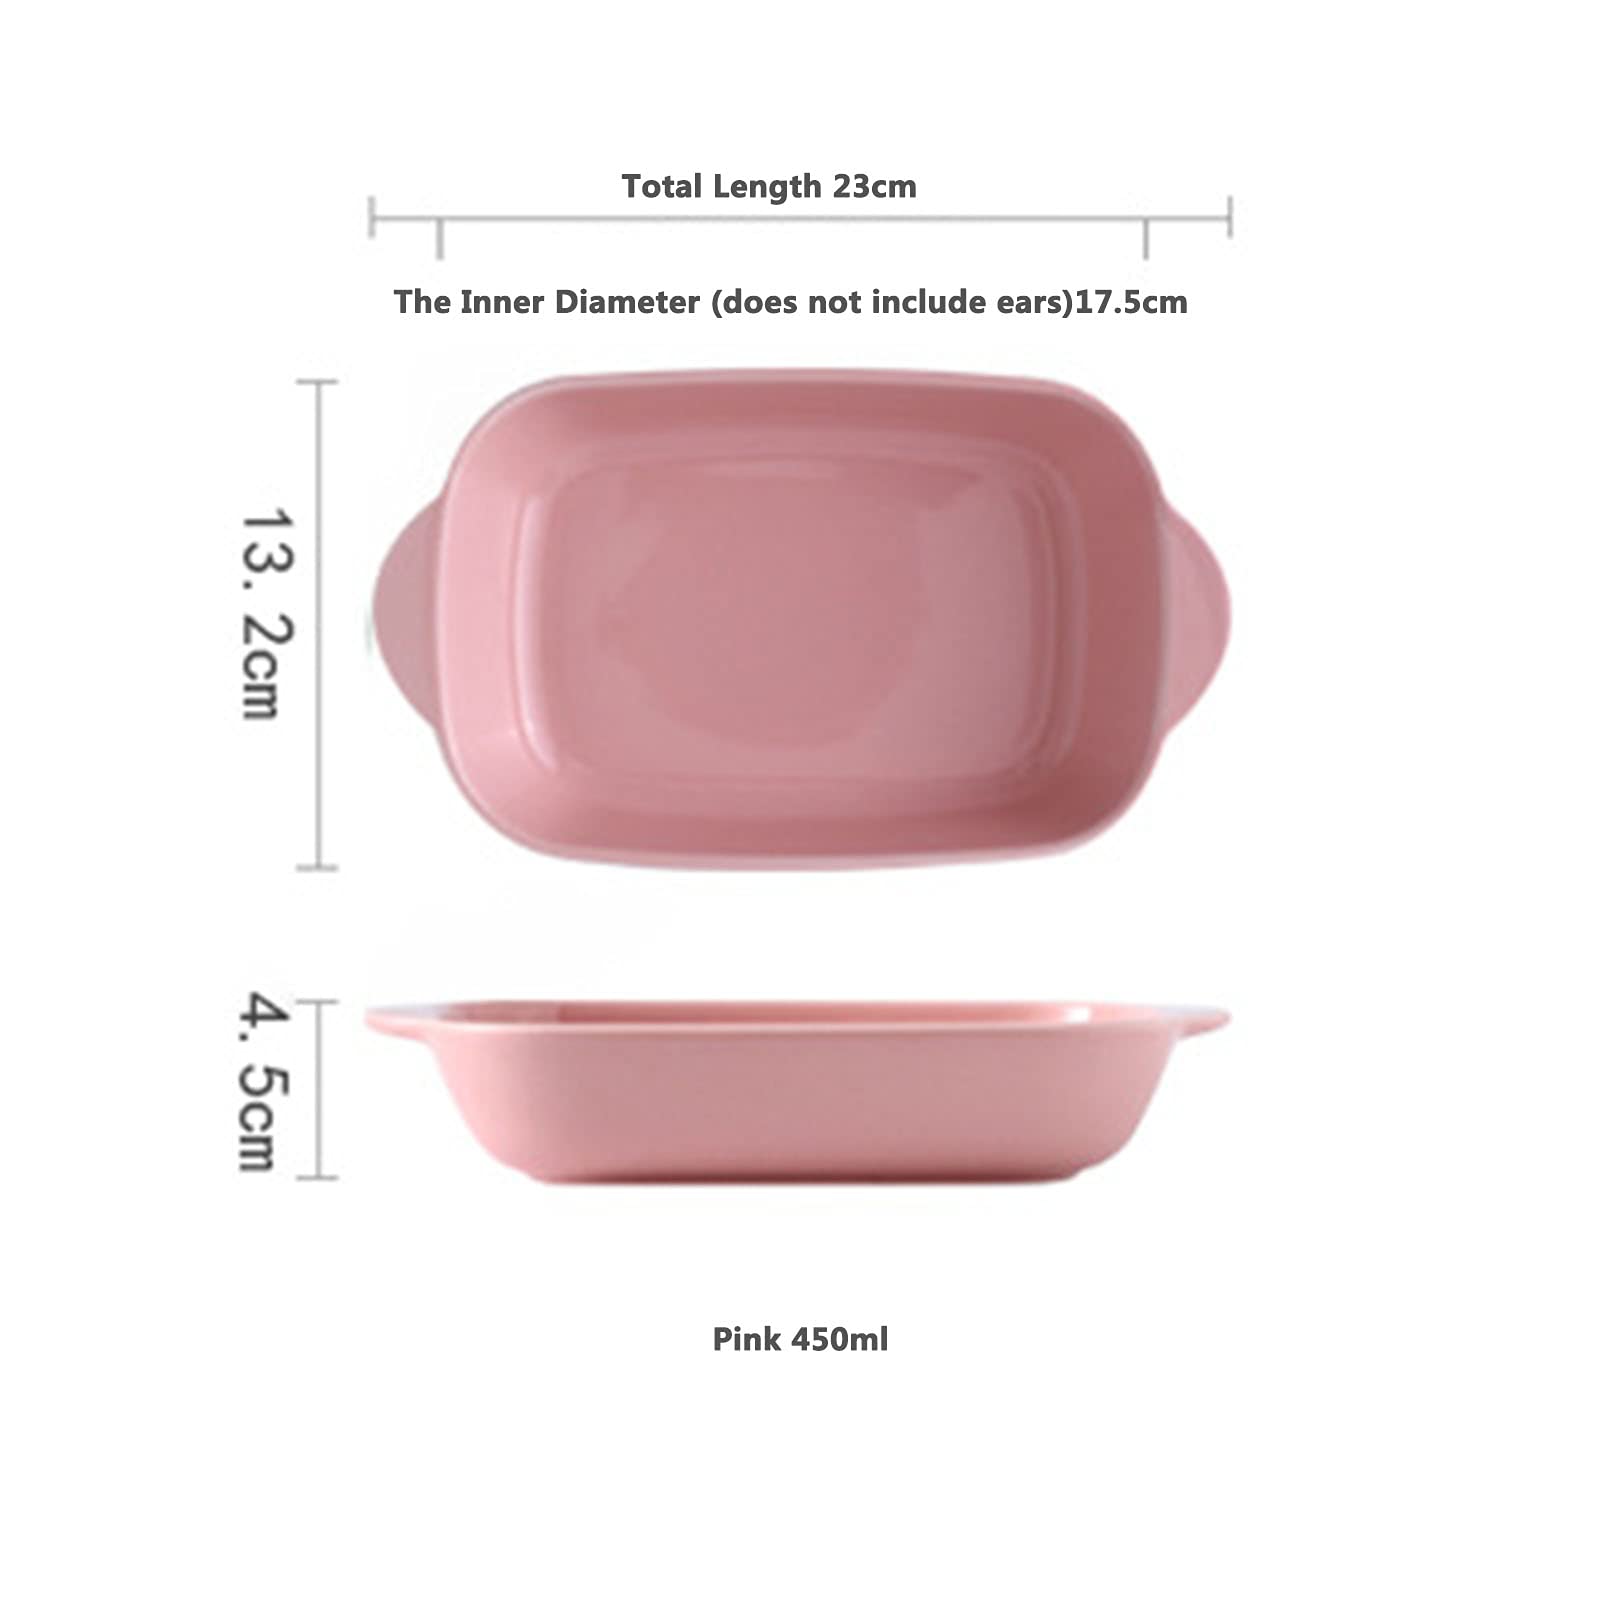 SHHMA Cookware Baking Dish with Double Handle for Casseroles Lasagna,9 inch Multi Baker for Oven and Stove,Easy to Store,Pink